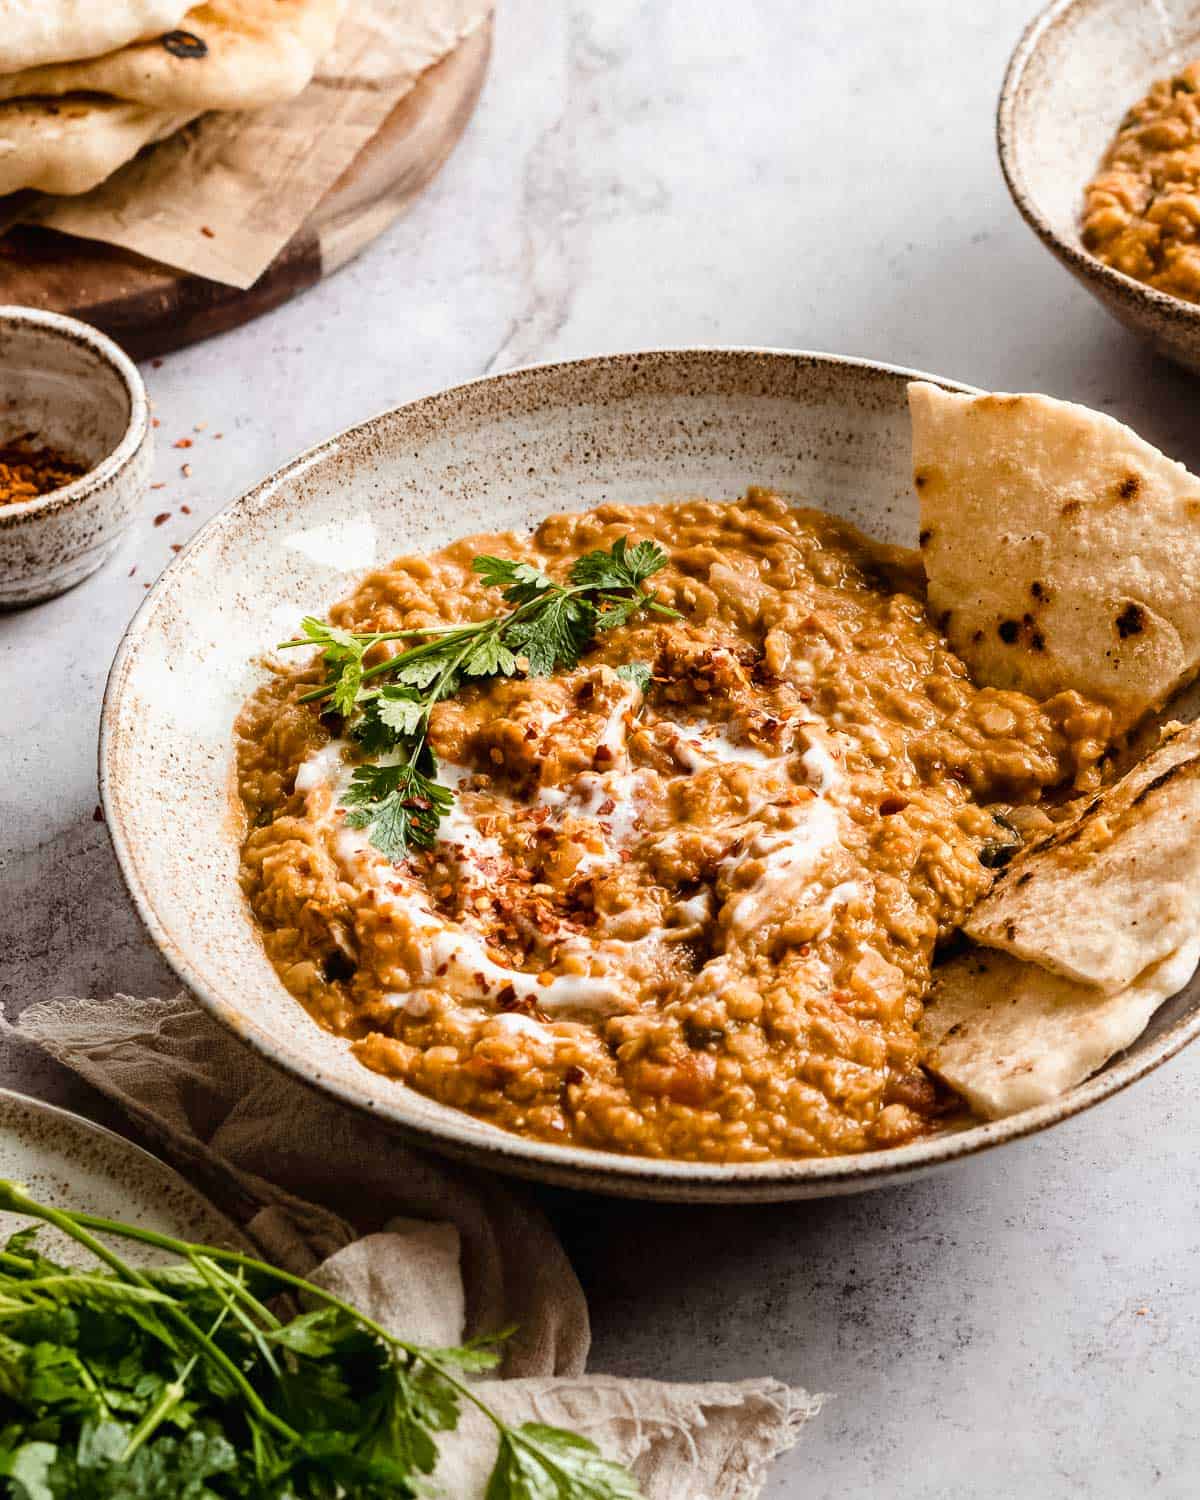 big bowl of red lentil dahl with some naan bread and topped with fresh herbs and yogurt.